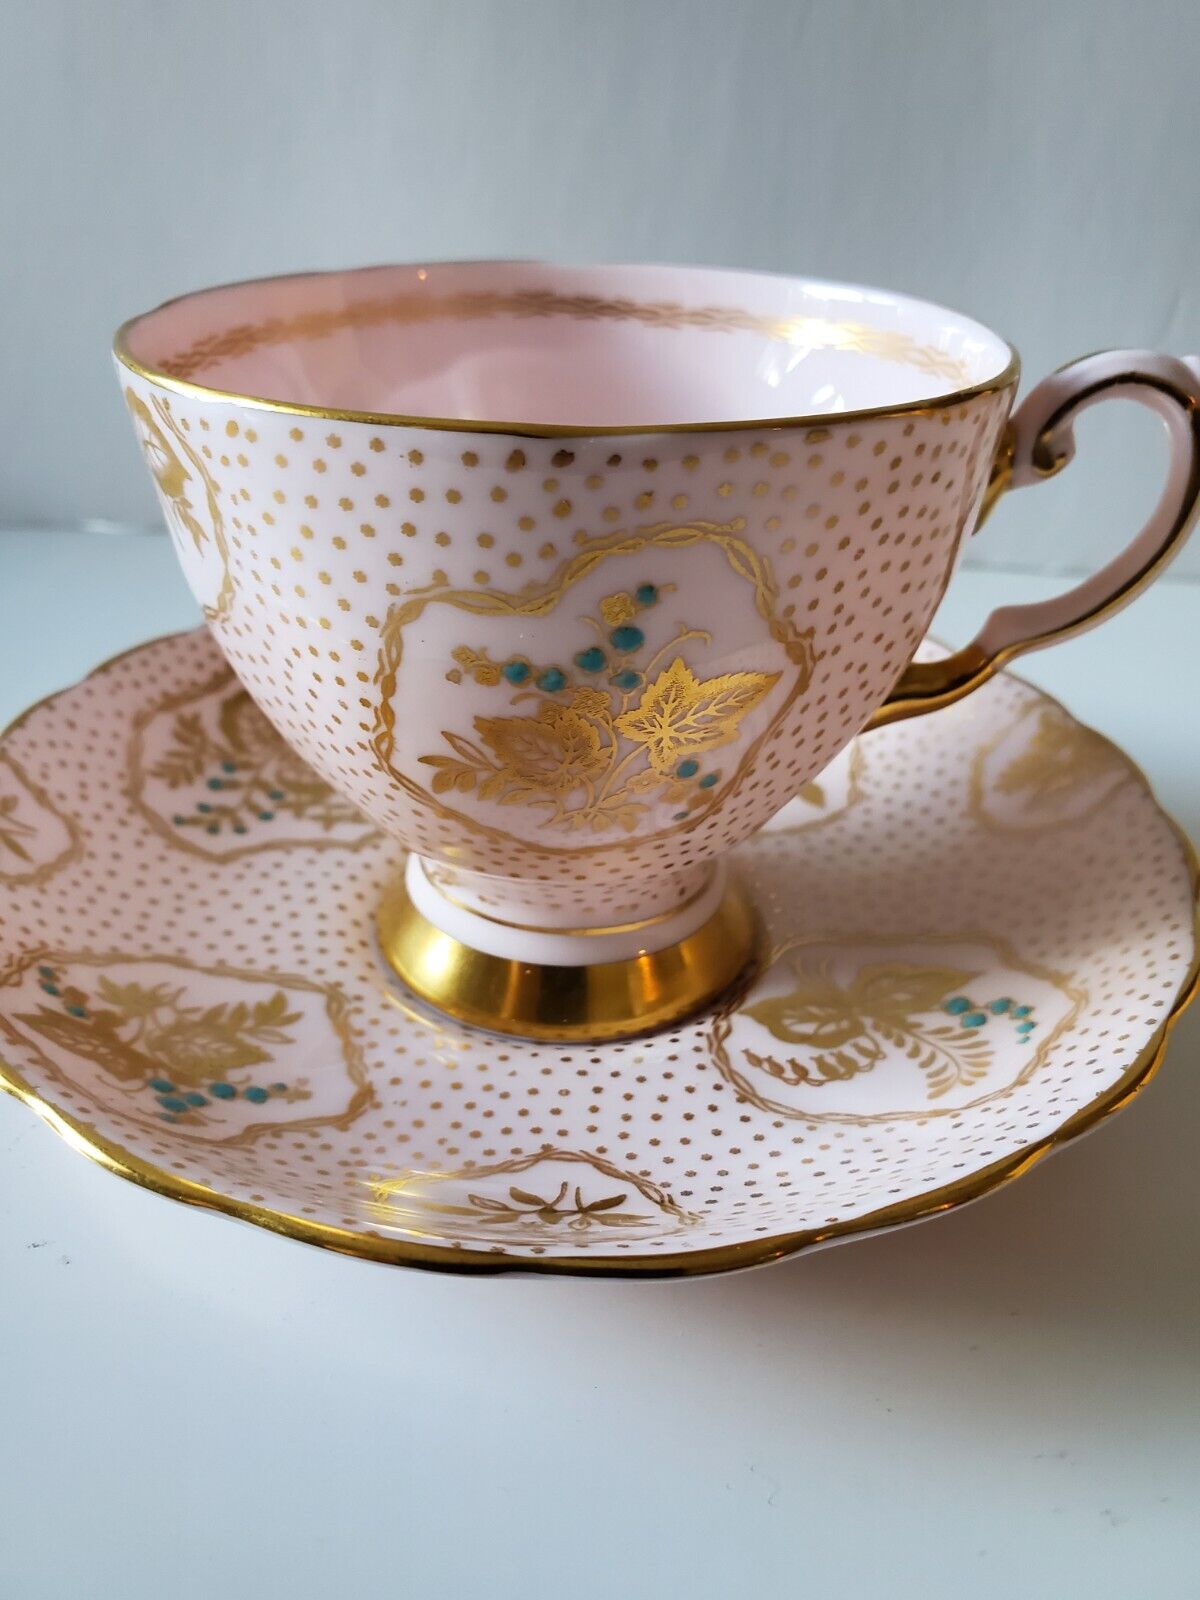 Vintage Tuscan Pink Tea Cup and Saucer with Gold Leaves, Fine English Bone China